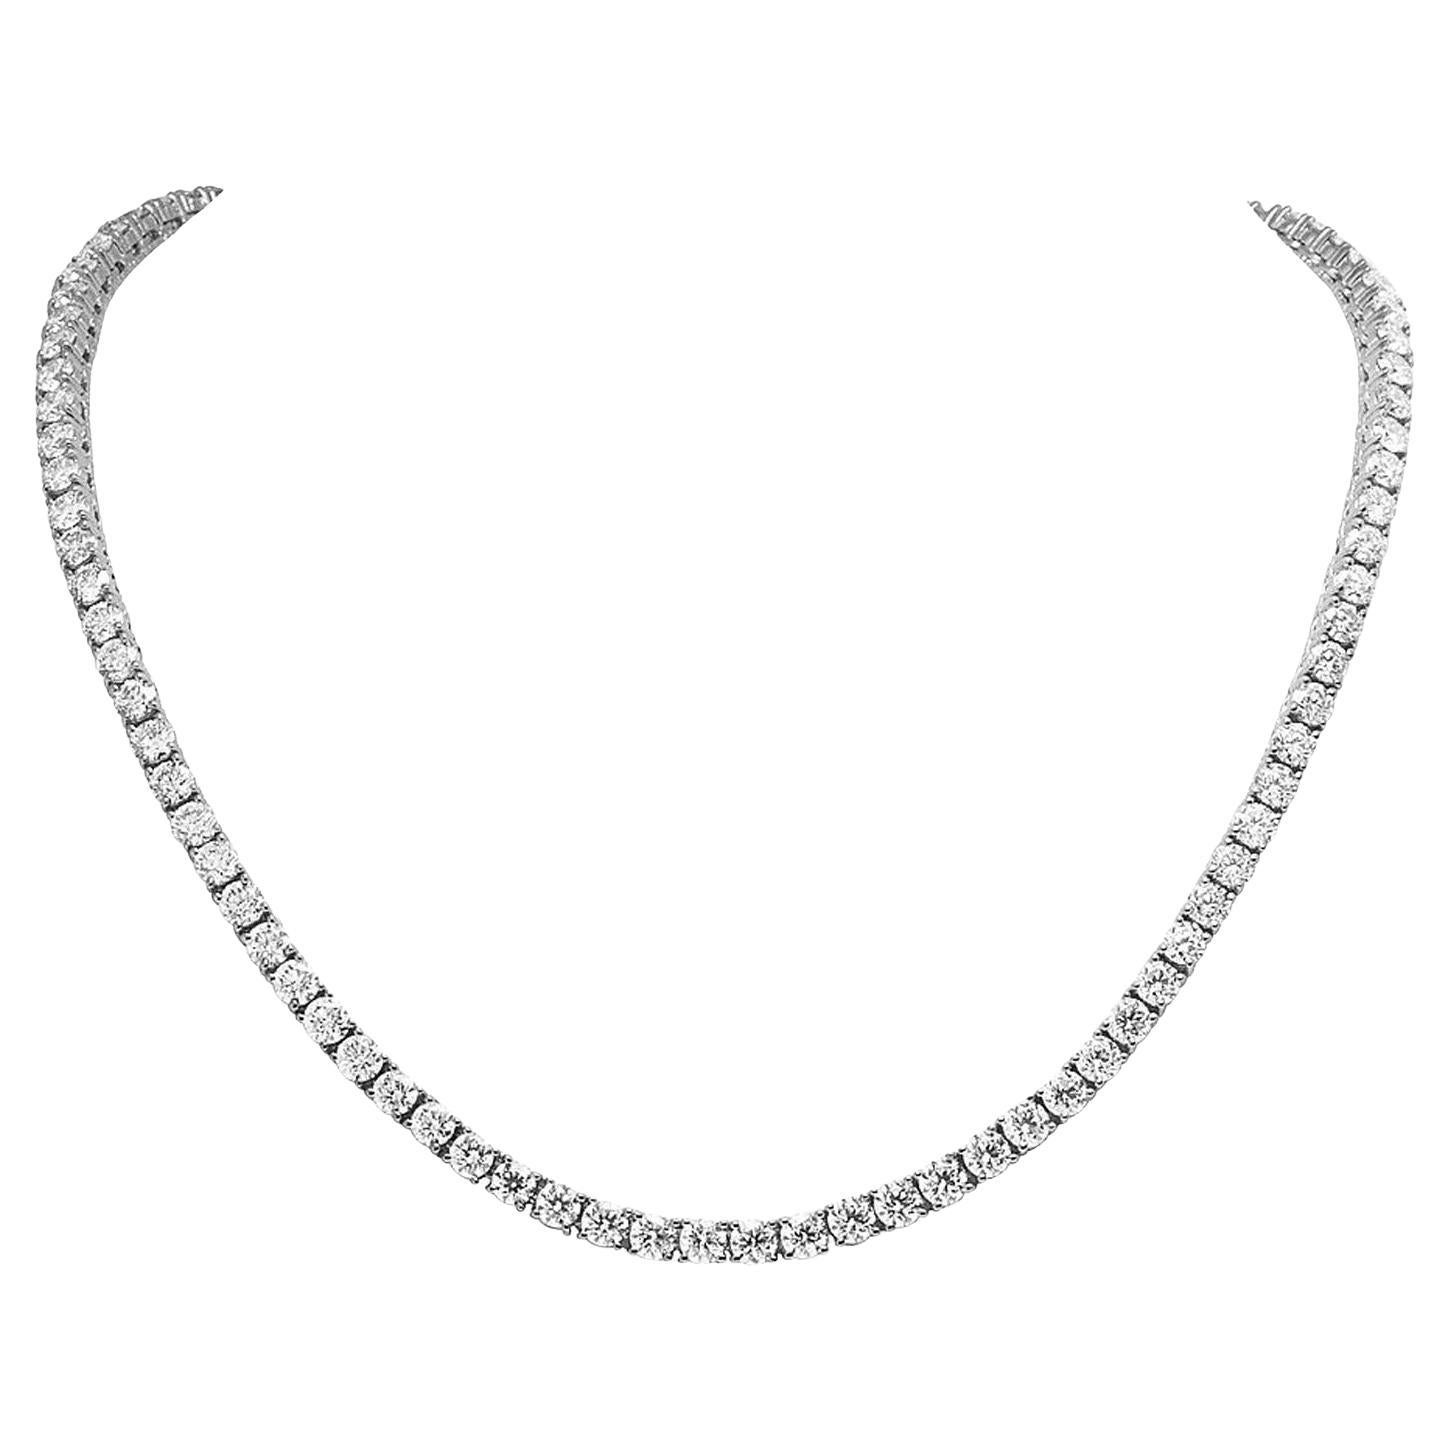 21.5ct Round Cut Diamond Tennis Necklace 14K White Gold 18.5 Inches 4-prongs For Sale